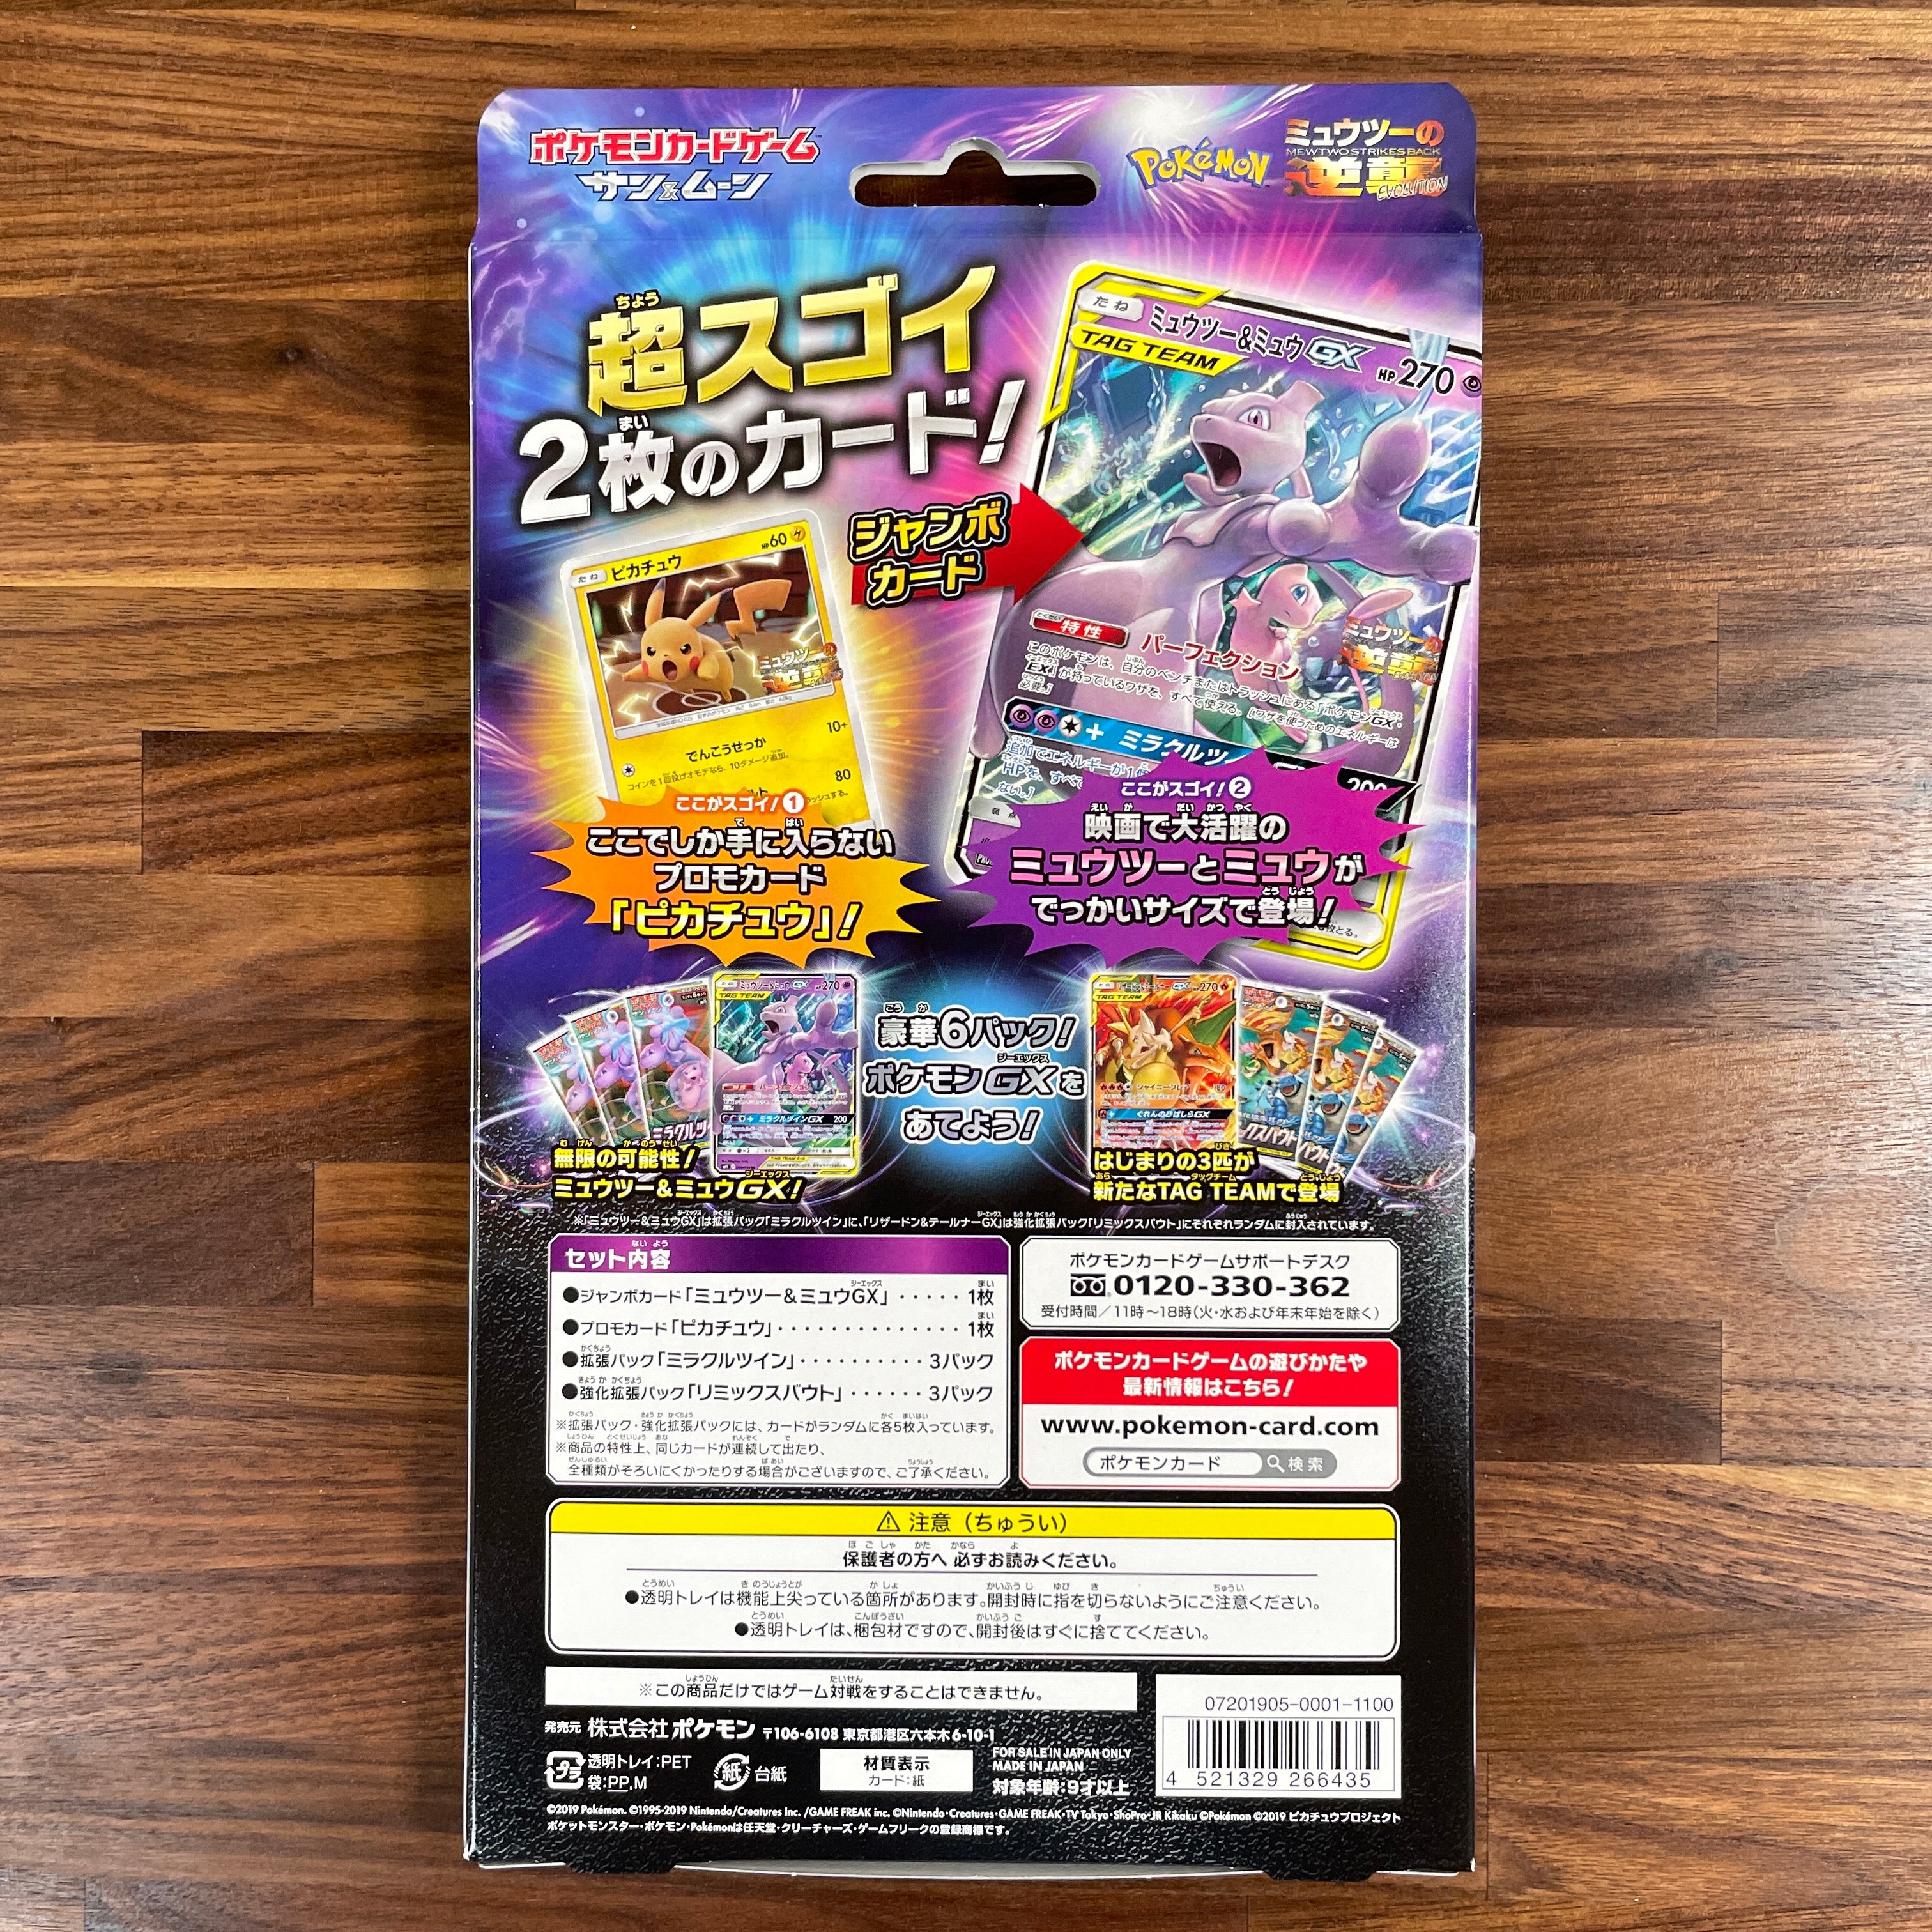 POKÉMON CARD GAME Sun & Moon Mewtwo & Mew GX MEWTWO STRIKES BACK EVOLUTION commemoration pack  Pack sold in cinema souvenir shop during the release of the movie MEWTWO STRIKES BACK EVOLUTION